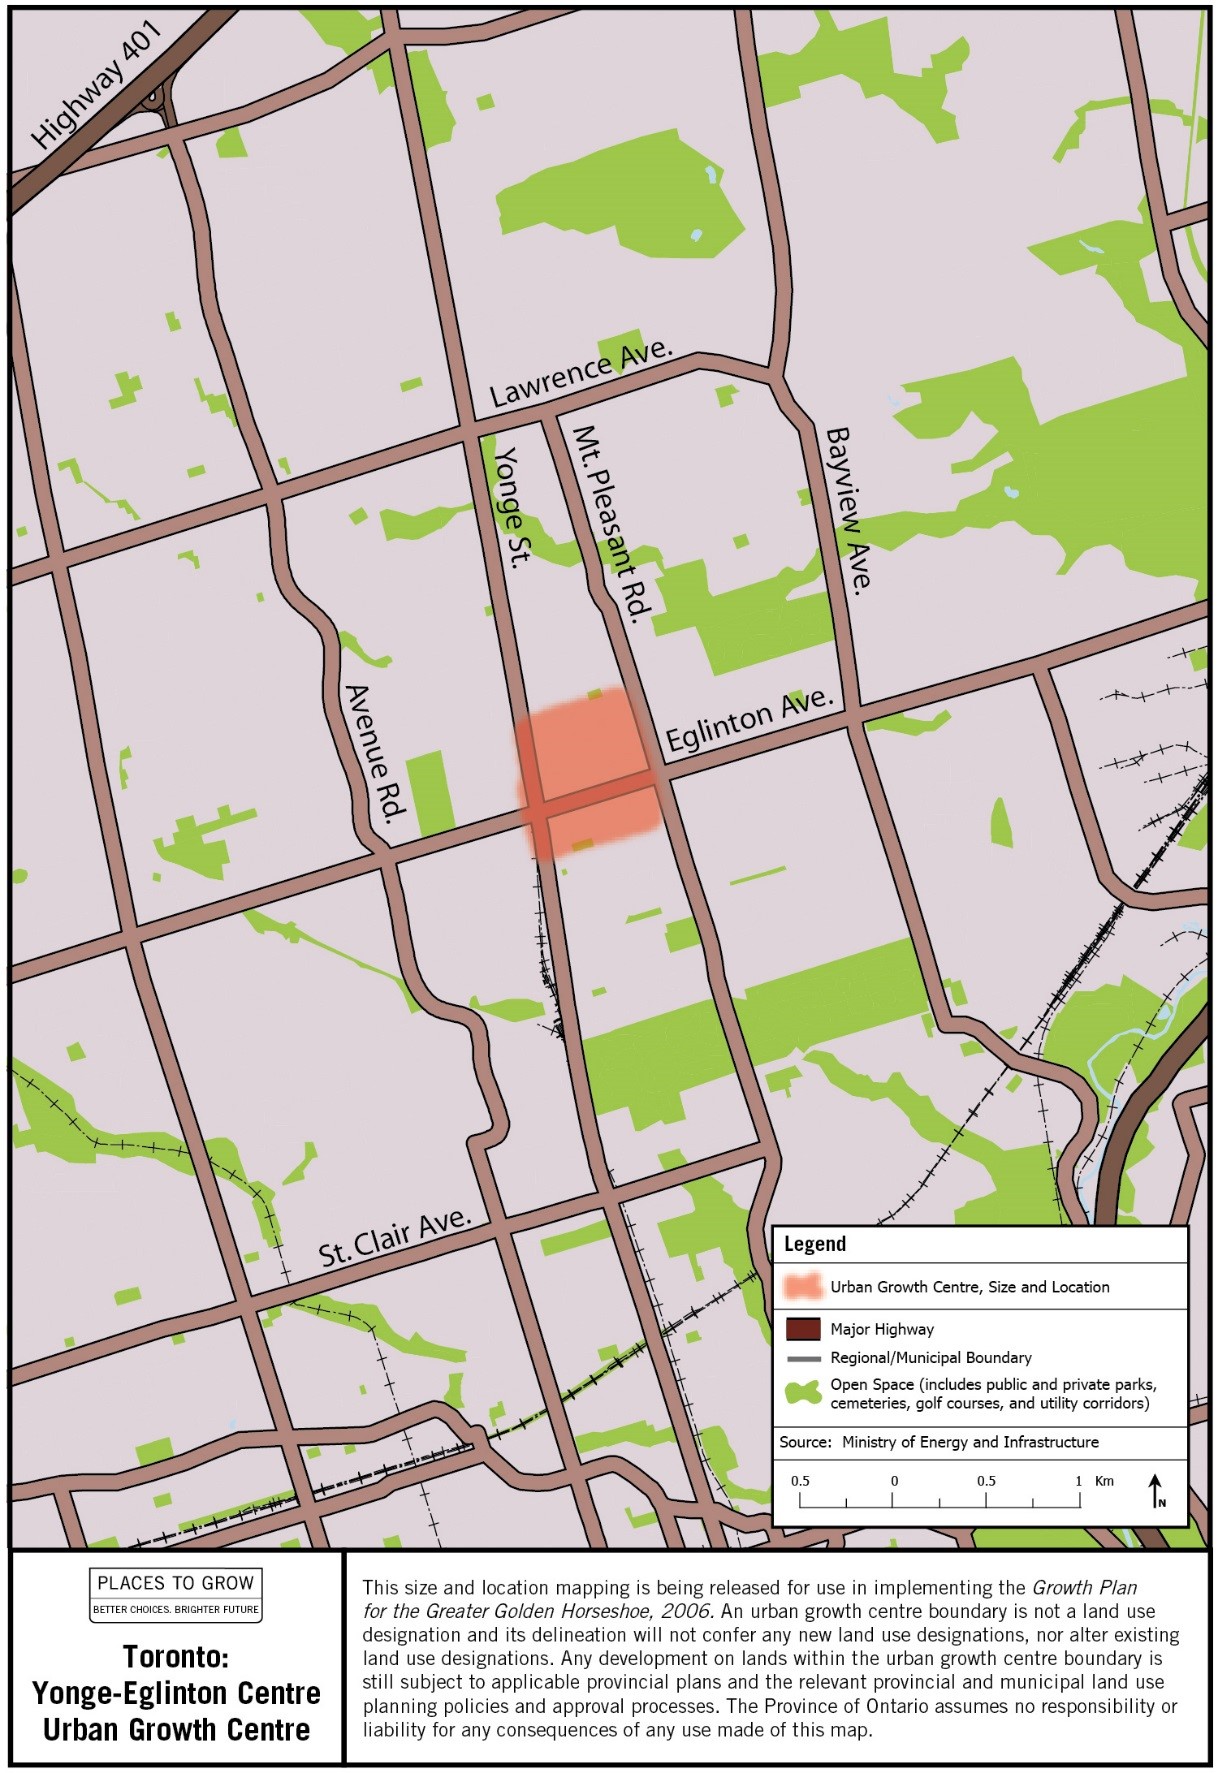 Map of the approximate size and location of the Toronto: Yonge-Eglinton Centre Urban Growth Centre in the vicinity of Yonge Street and Eglinton Avenue.